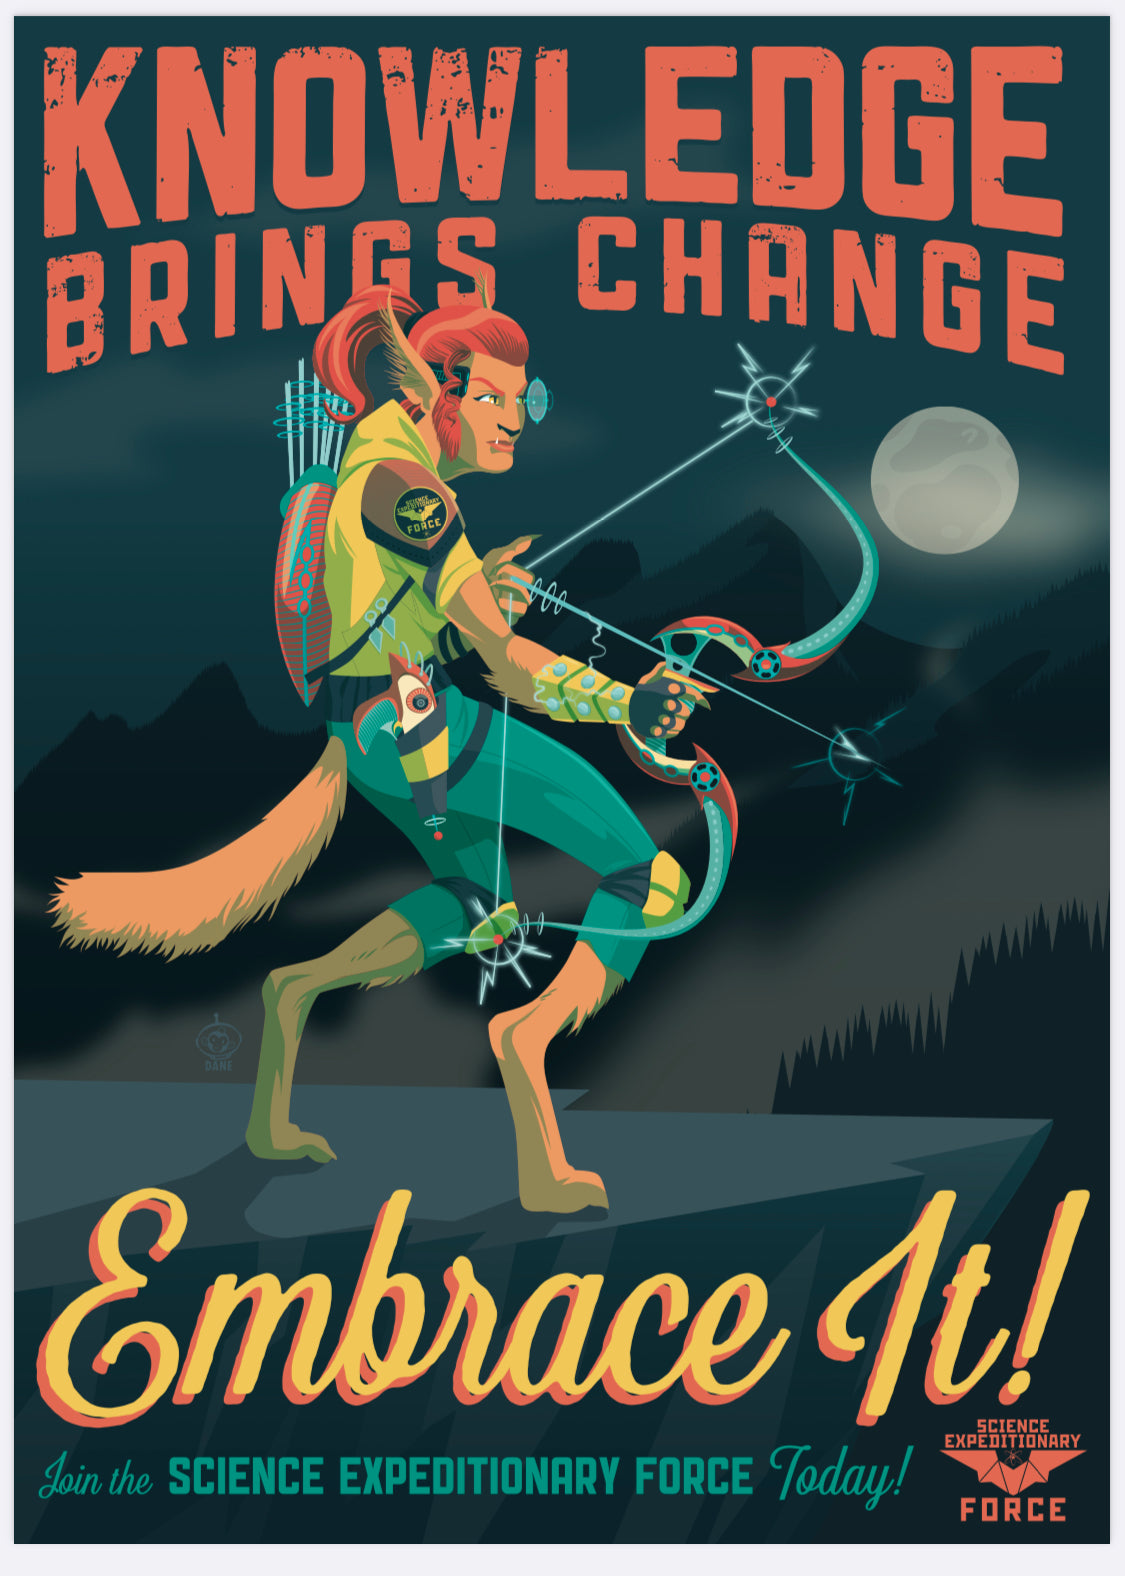 Science Expeditionary Force Embrace Change 12x18 Limited Edition Giclee